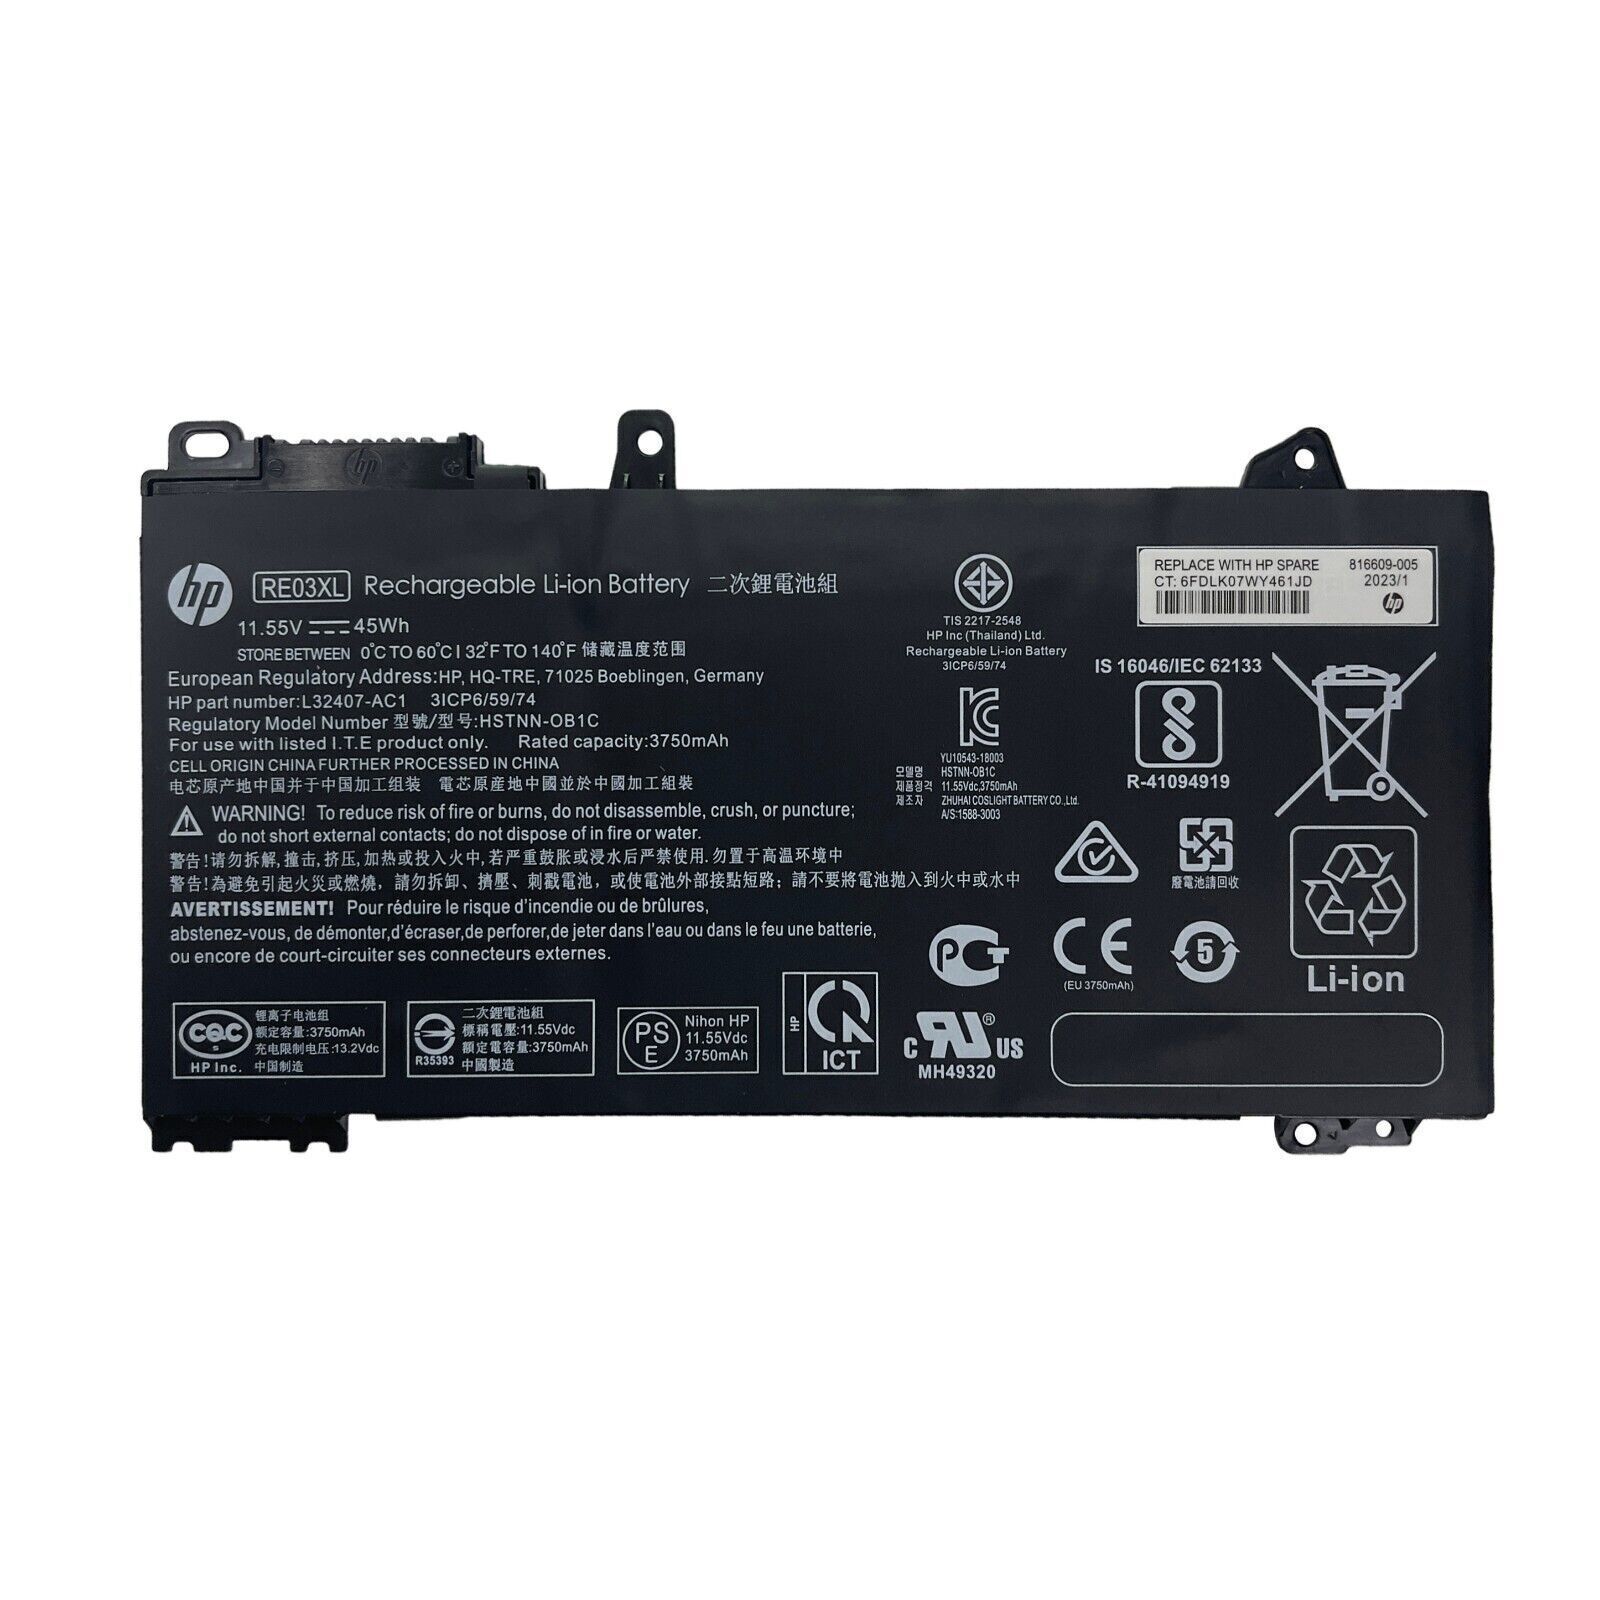 OEM 45Wh RE03XL Battery For HP ProBook 430 440 445 450 455 455R G6 L32407-AC1